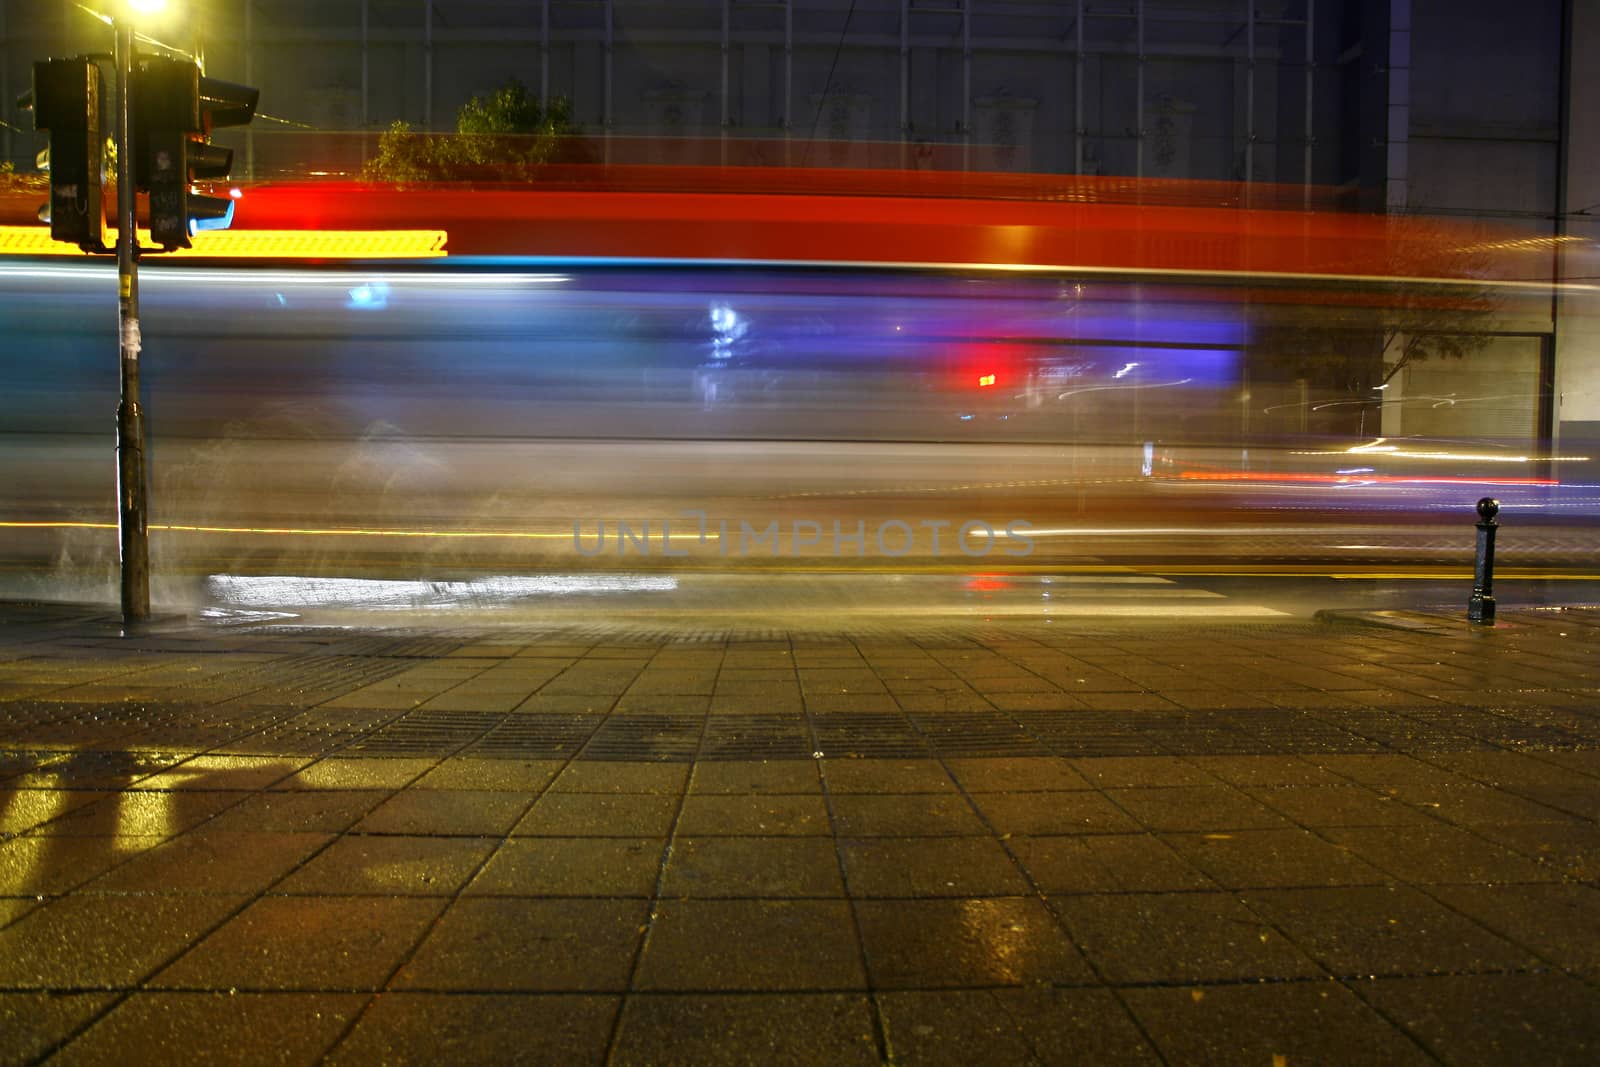 Long exposure in night traffic on road and pedestrian crossing
